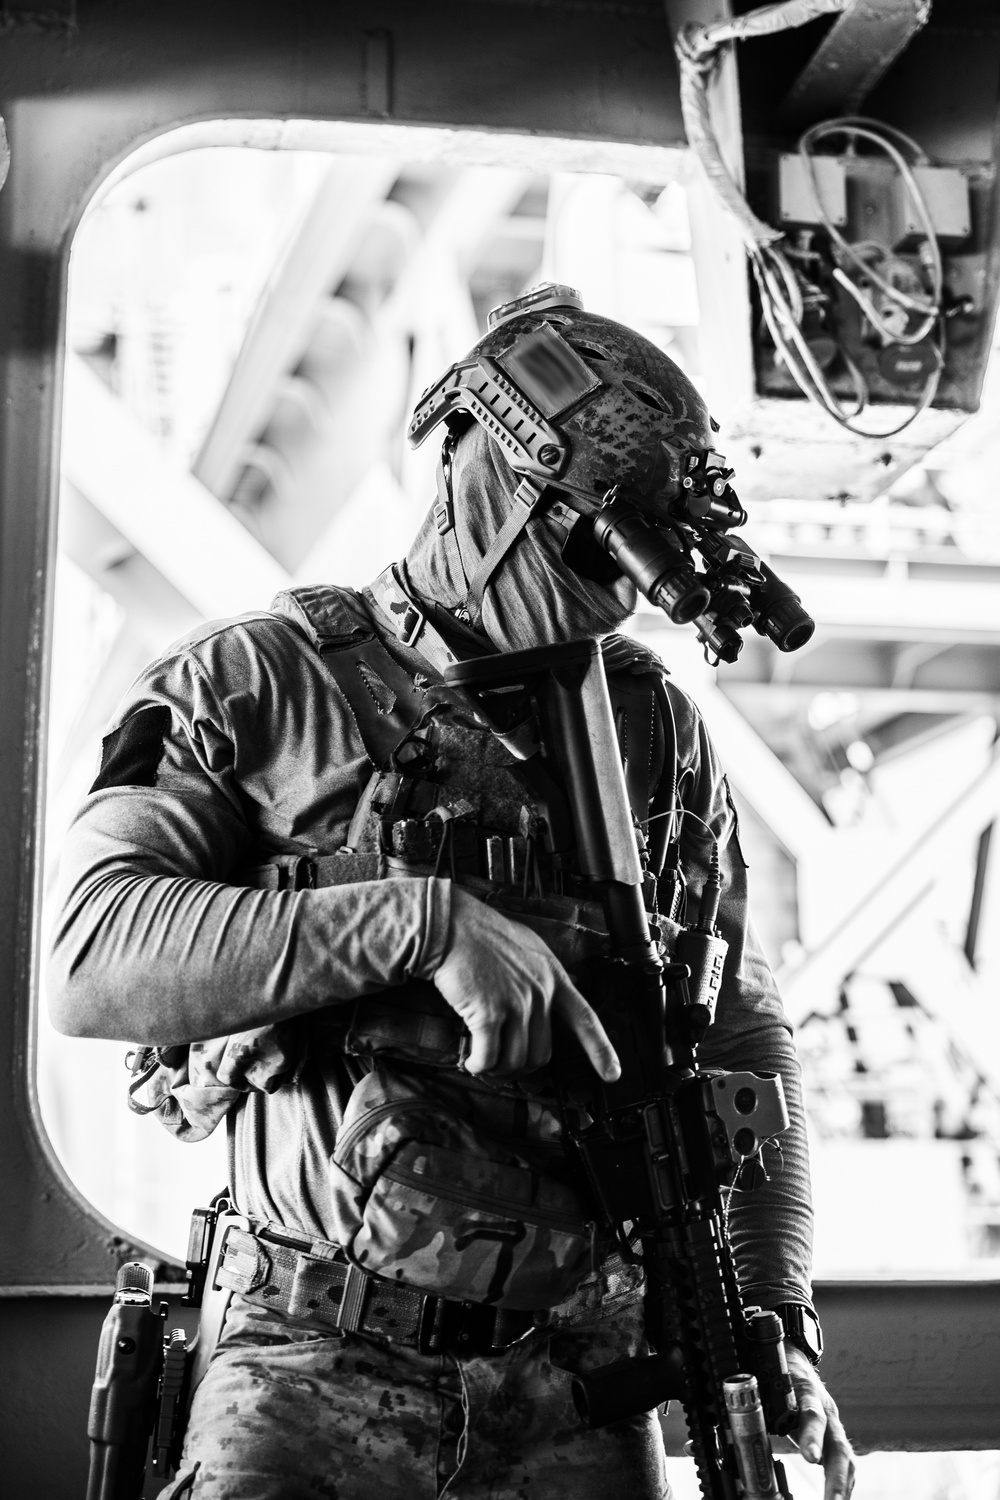 US Naval Special Warfare SEALs enhance interoperability through specialized training in Cyprus with Cypriot Underwater Demolition Team